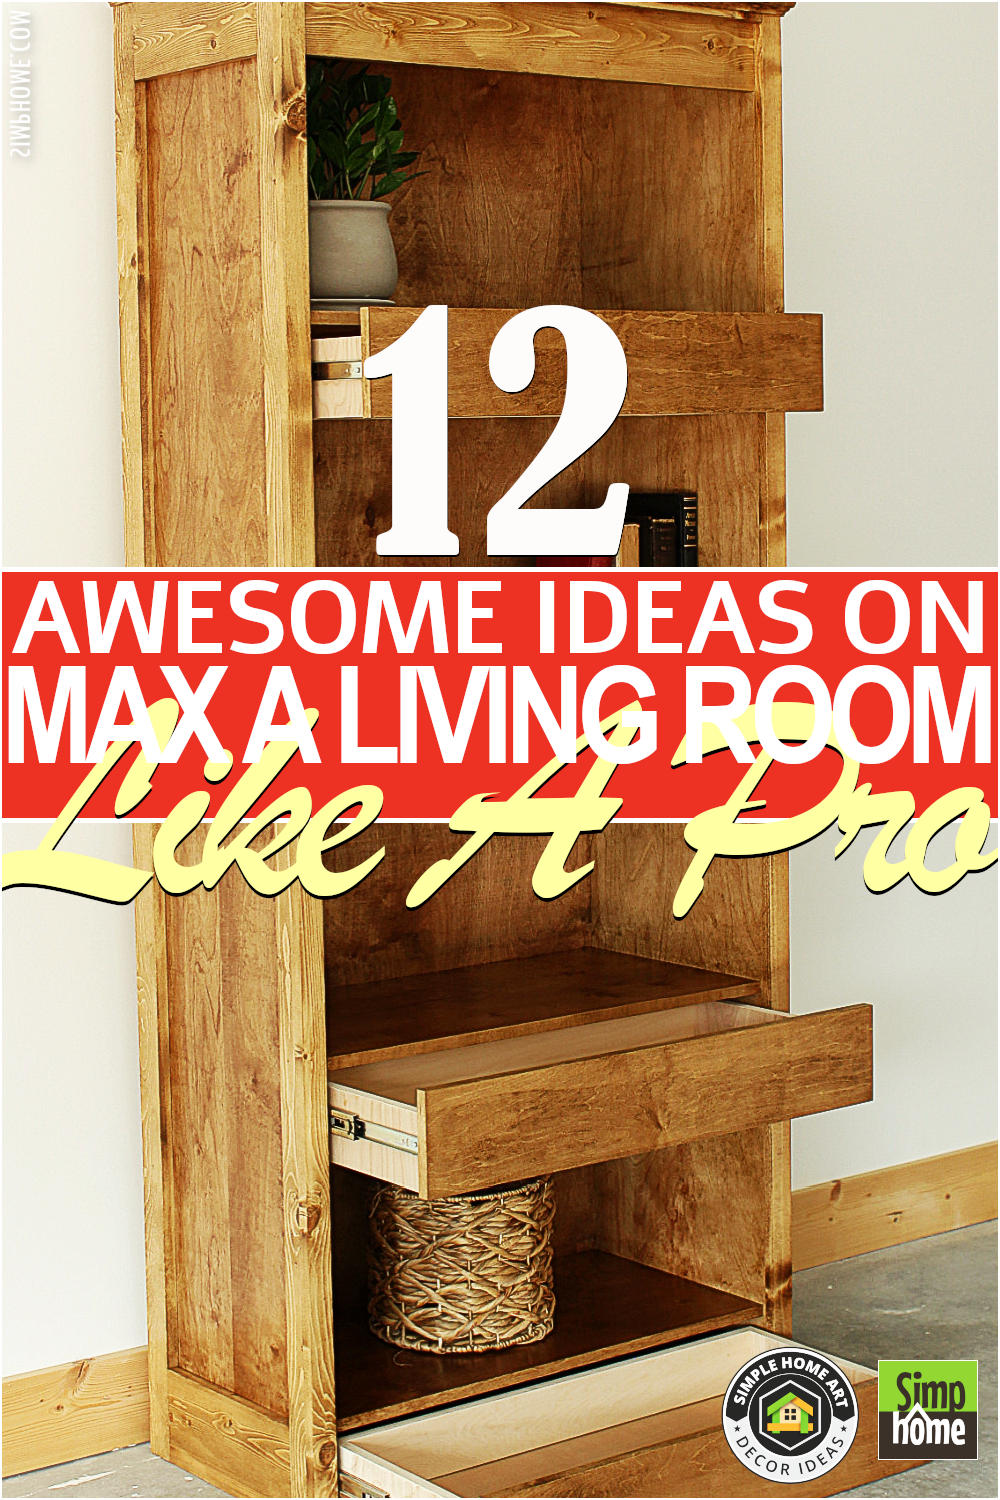 DIY ideas on how to max a small living room like a pro